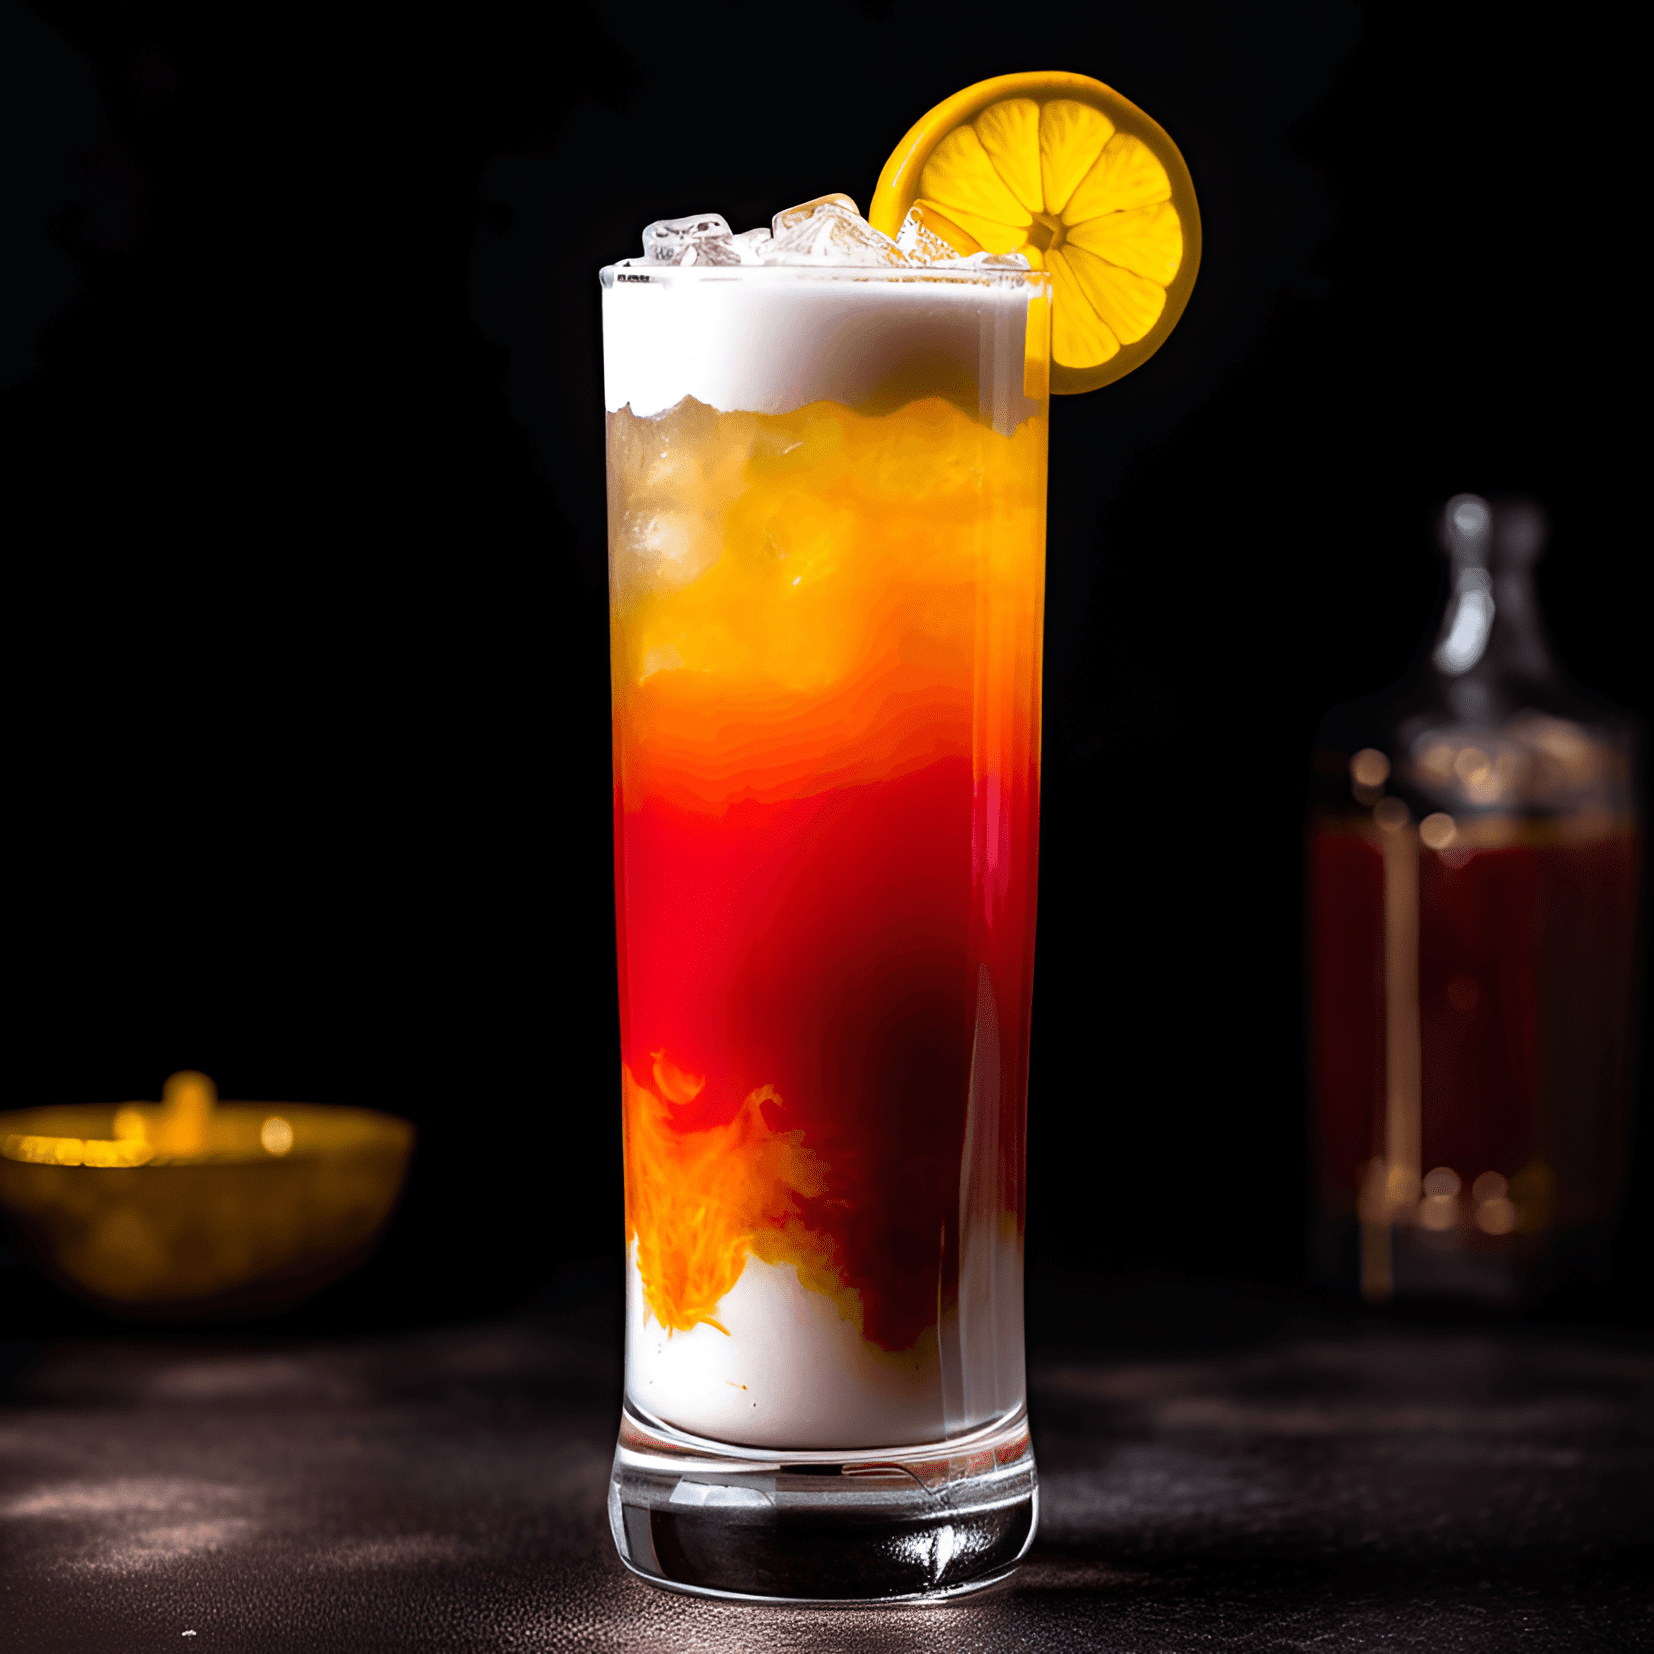 Zulu Cocktail Recipe - The Zulu cocktail is a delightful mix of sweet, sour, and fruity flavors. It has a tangy citrus taste from the lime and orange juices, balanced by the sweetness of the pineapple juice and grenadine. The rum adds a warm, smooth, and slightly spicy kick, making this drink both refreshing and invigorating.